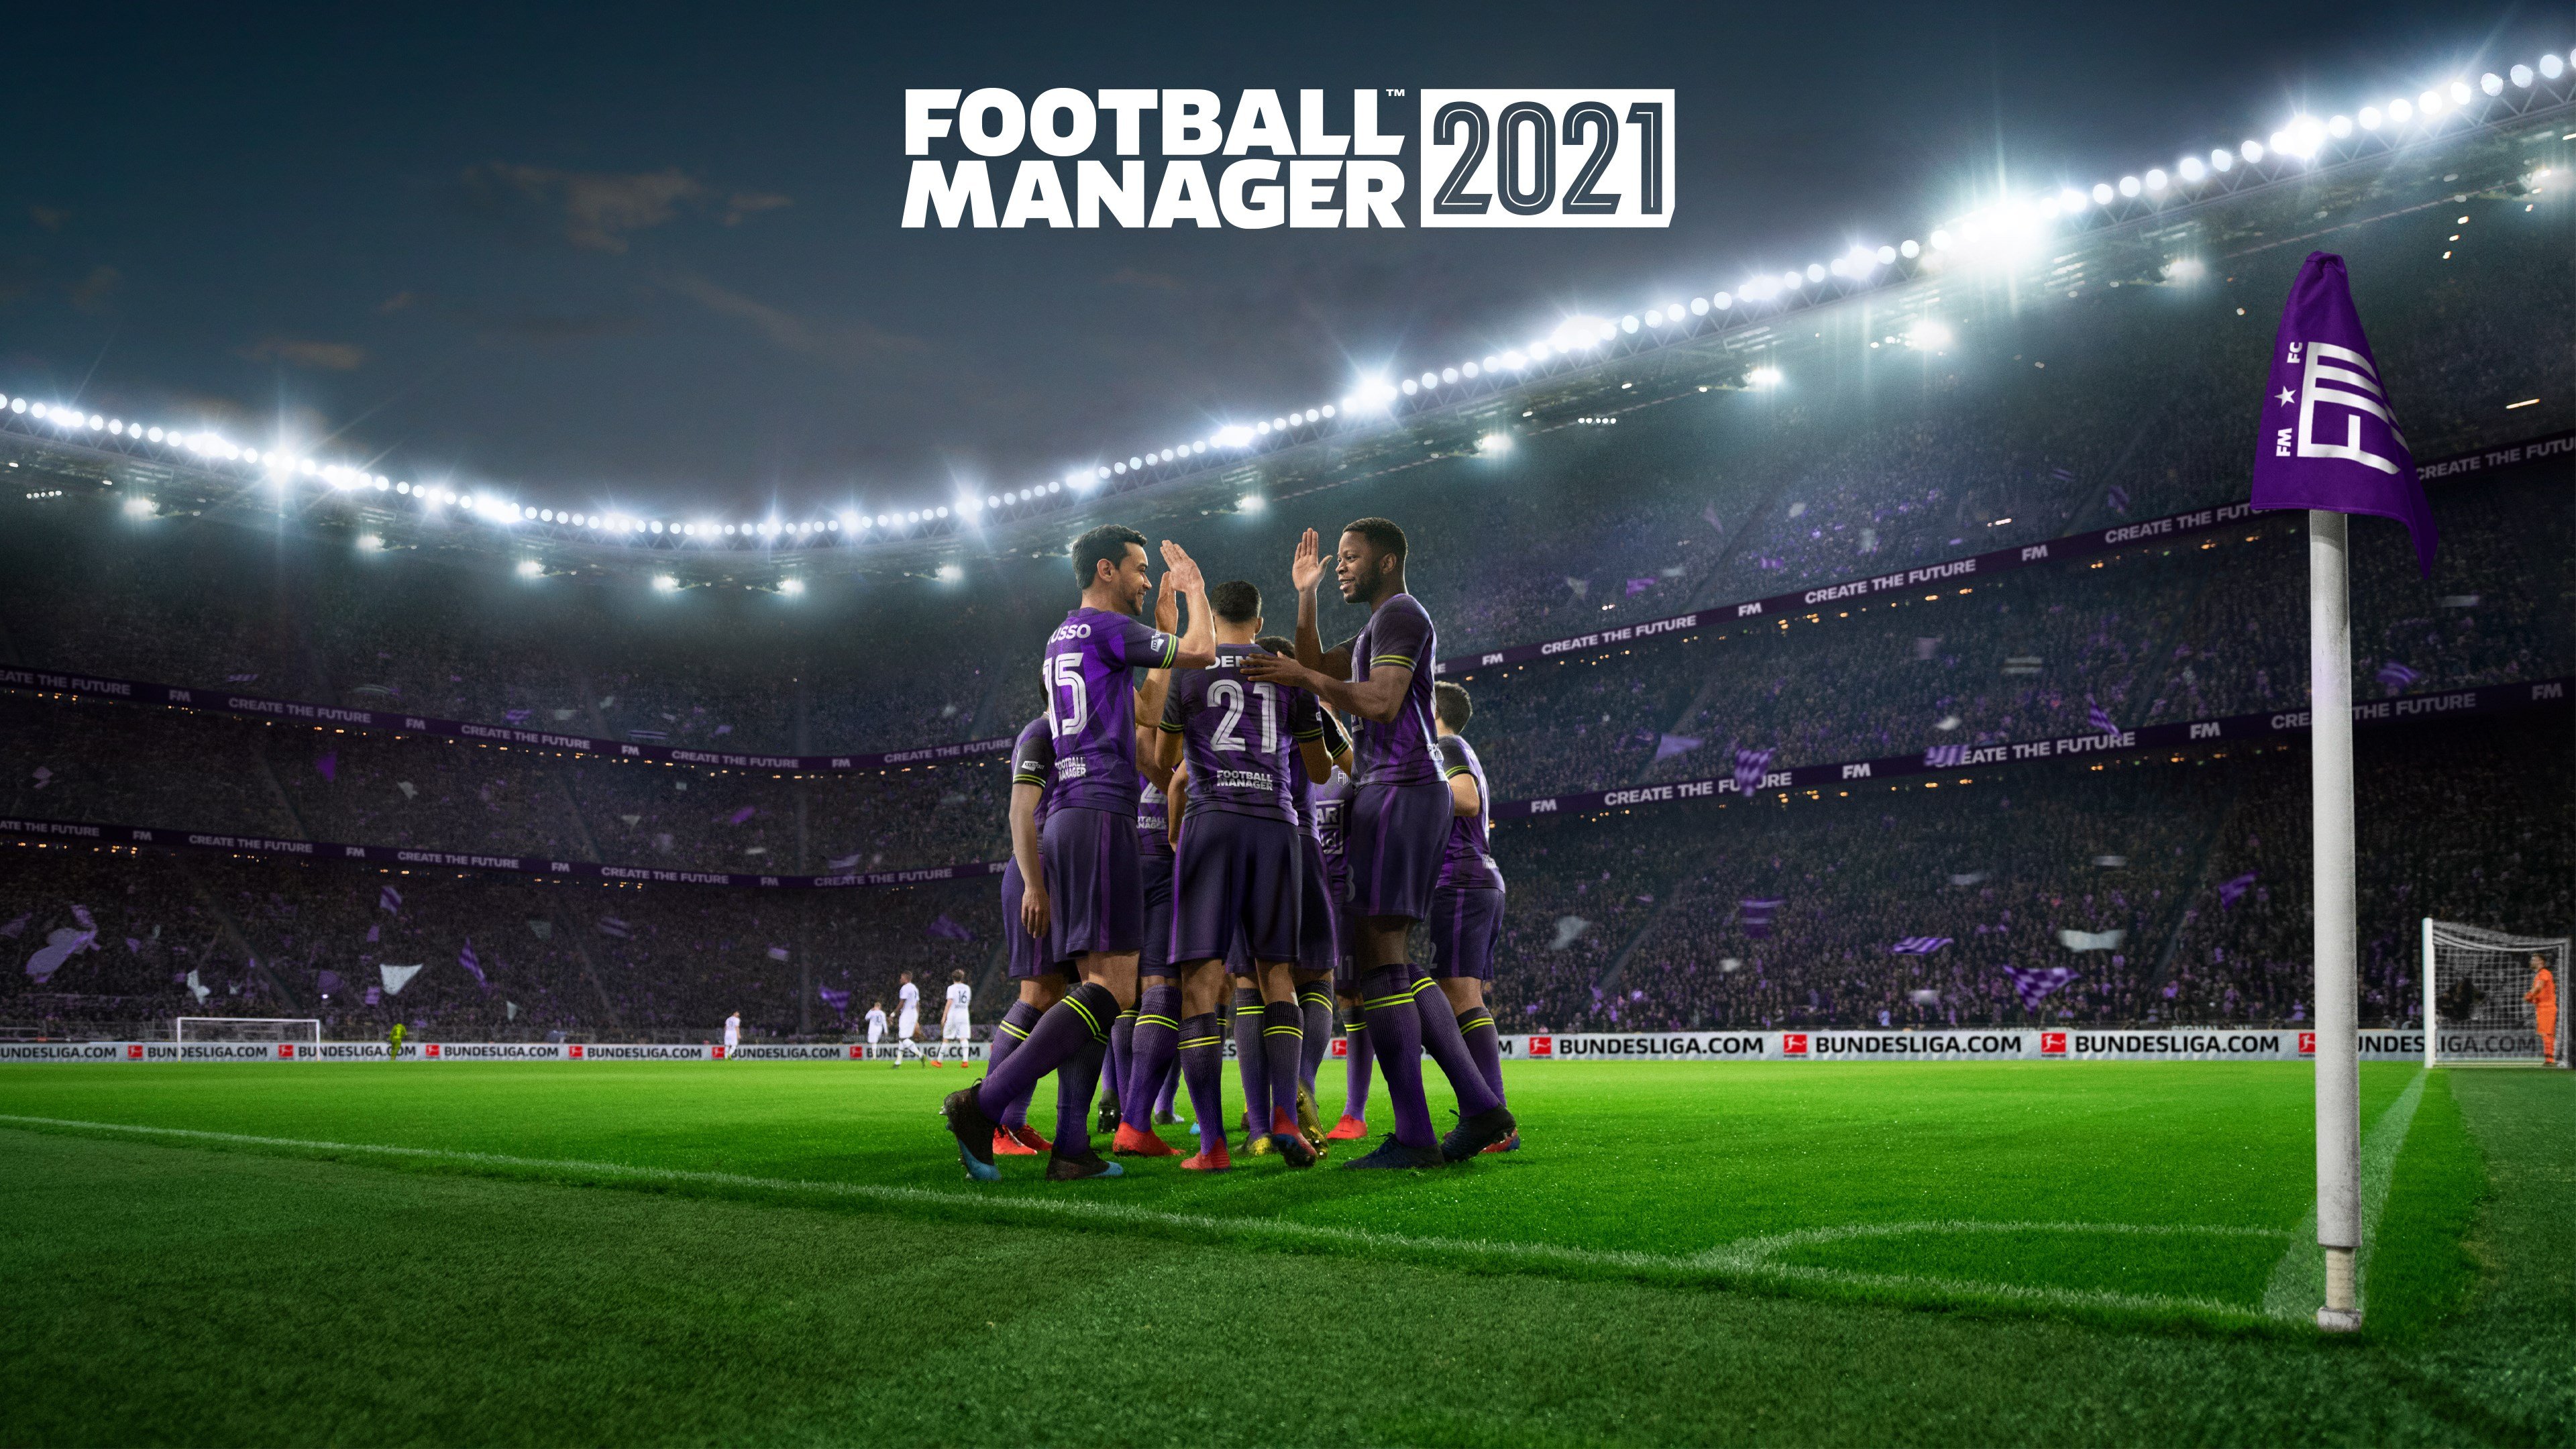 Football Manager 2021 cover image